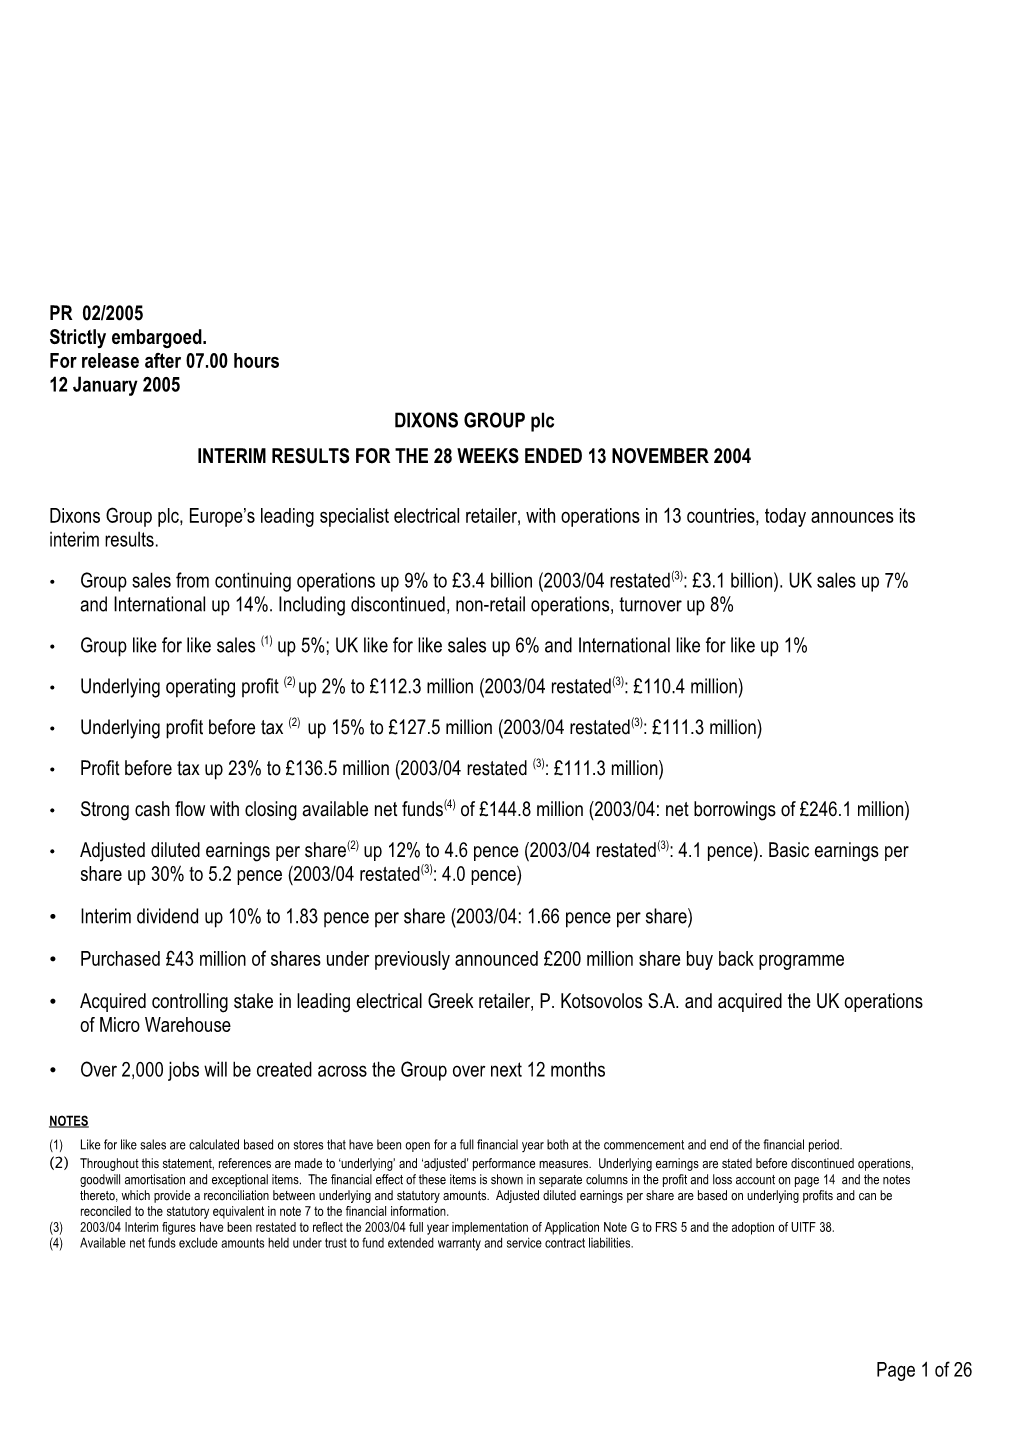 PR 02/2005 Strictly Embargoed. for Release After 07.00 Hours 12 January 2005 DIXONS GROUP Plc INTERIM RESULTS for the 28 WEEKS ENDED 13 NOVEMBER 2004